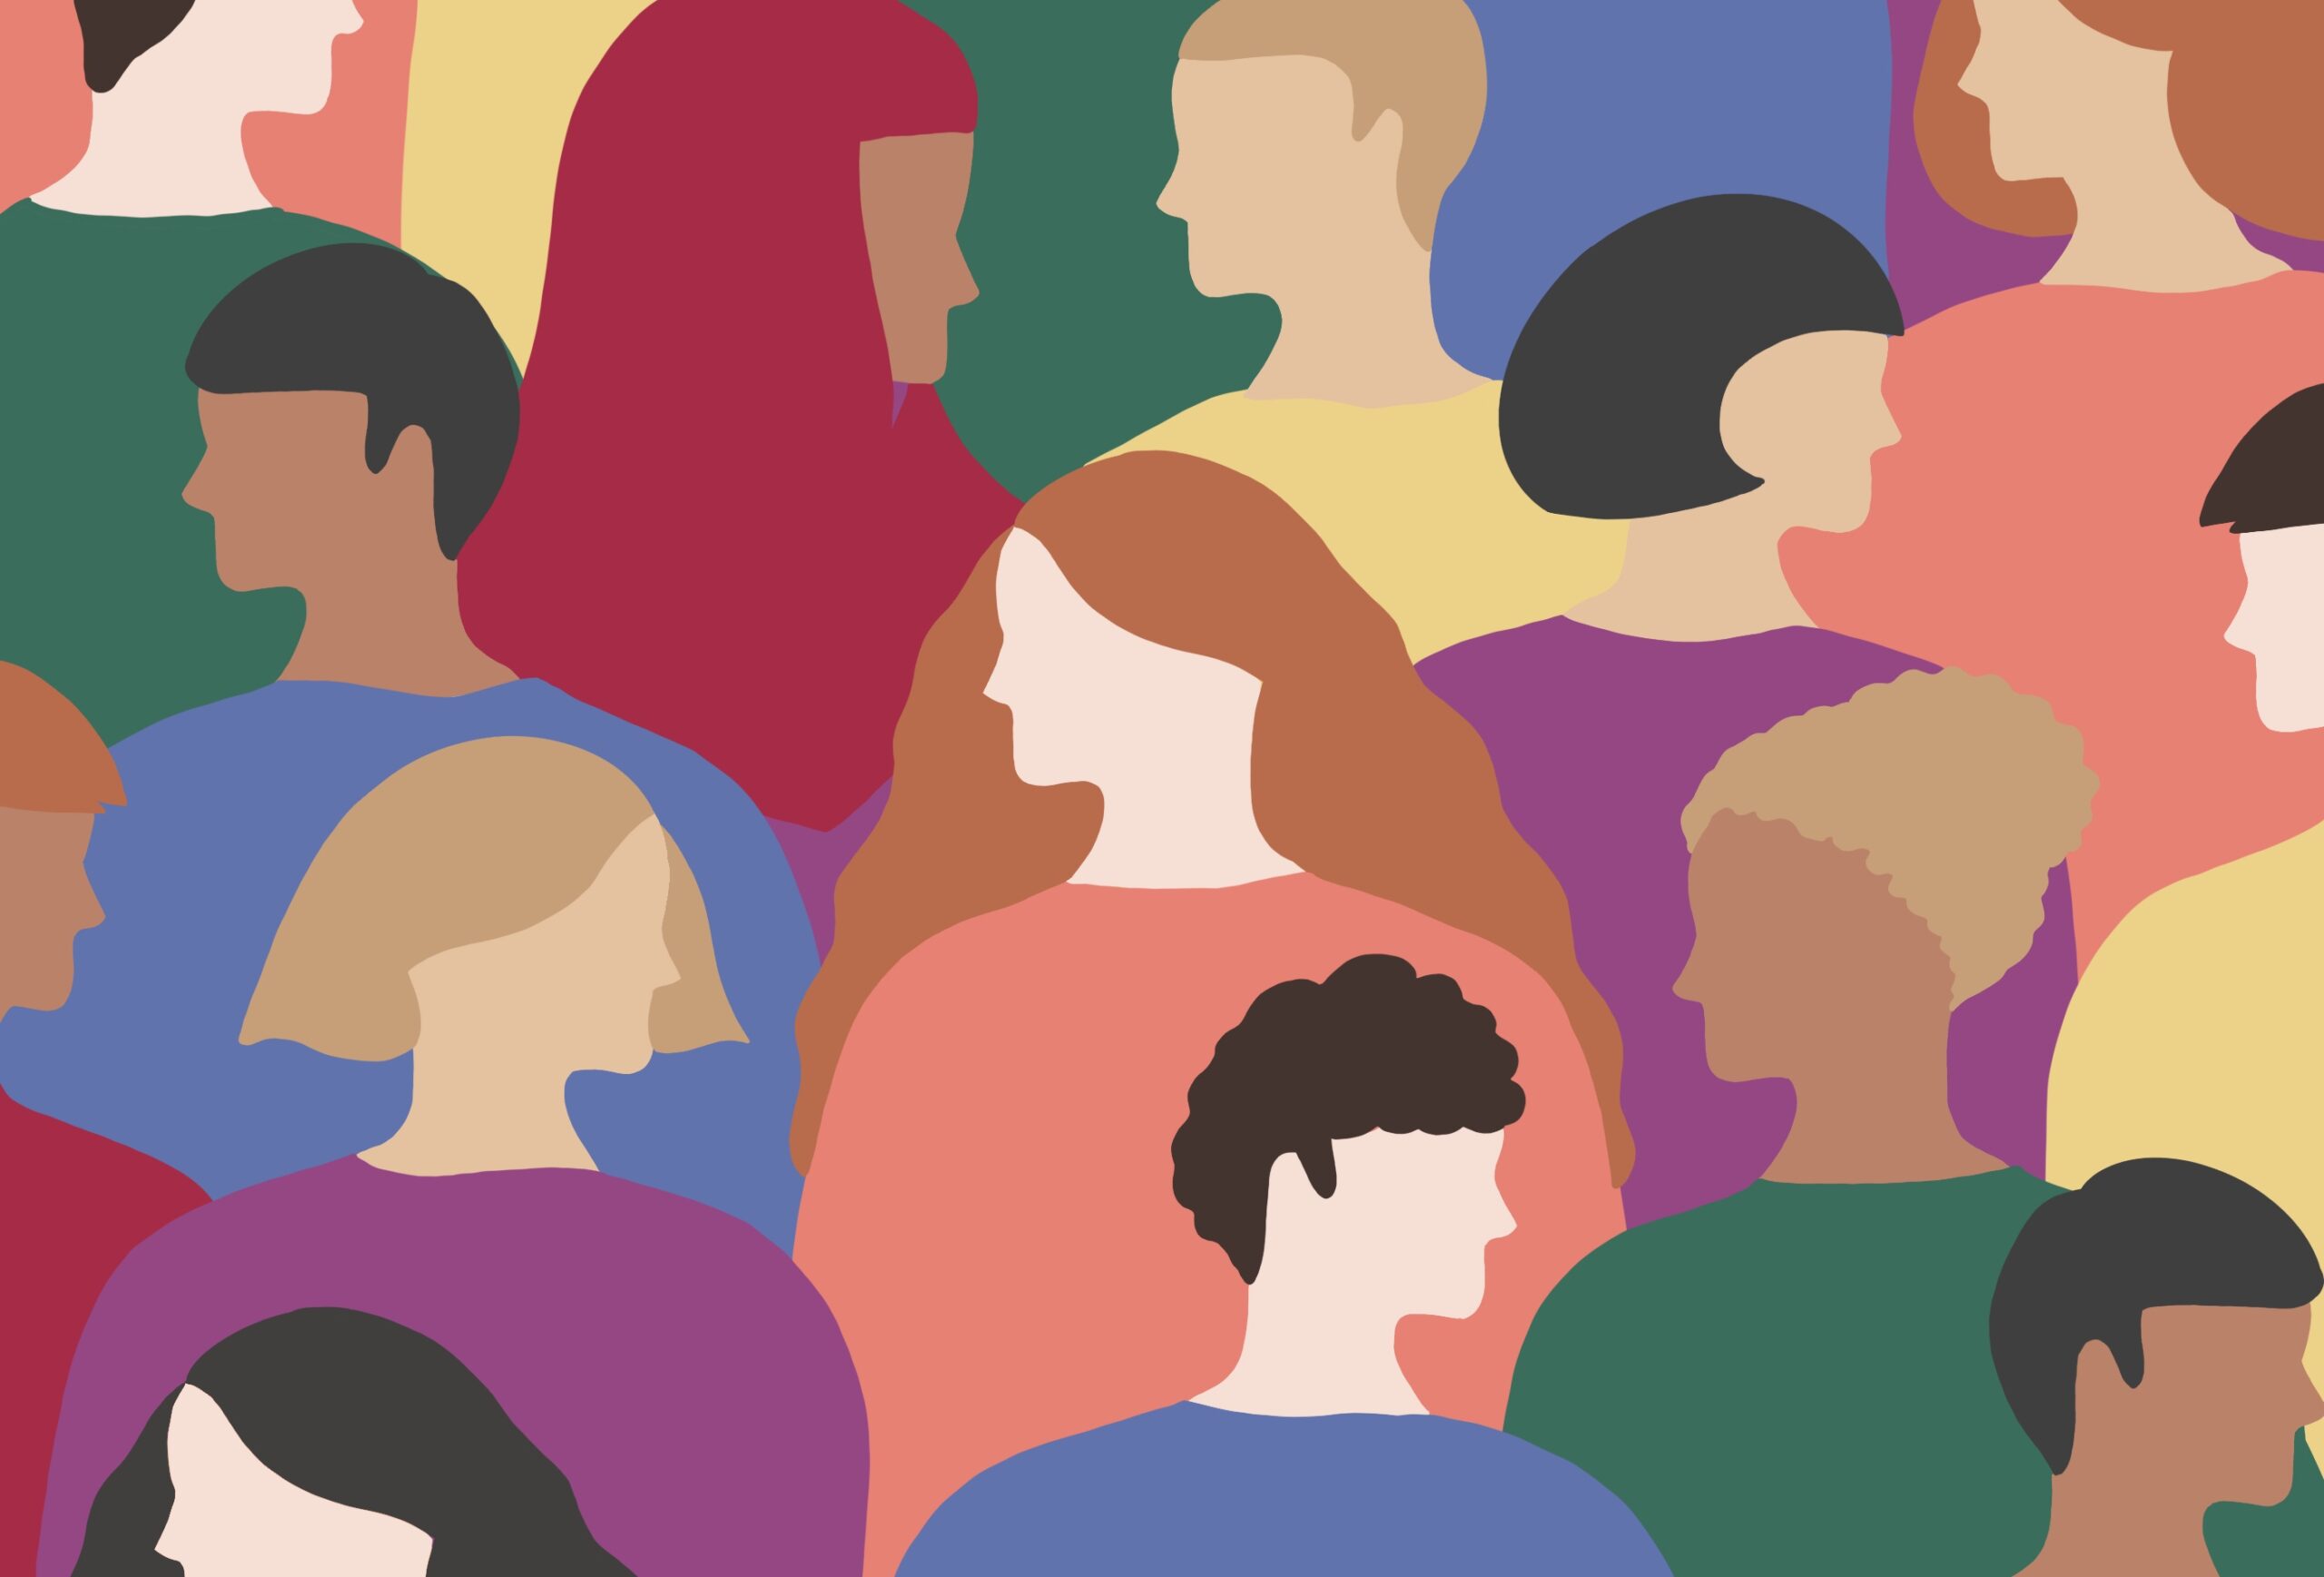 Illustration depicting a diverse group of people